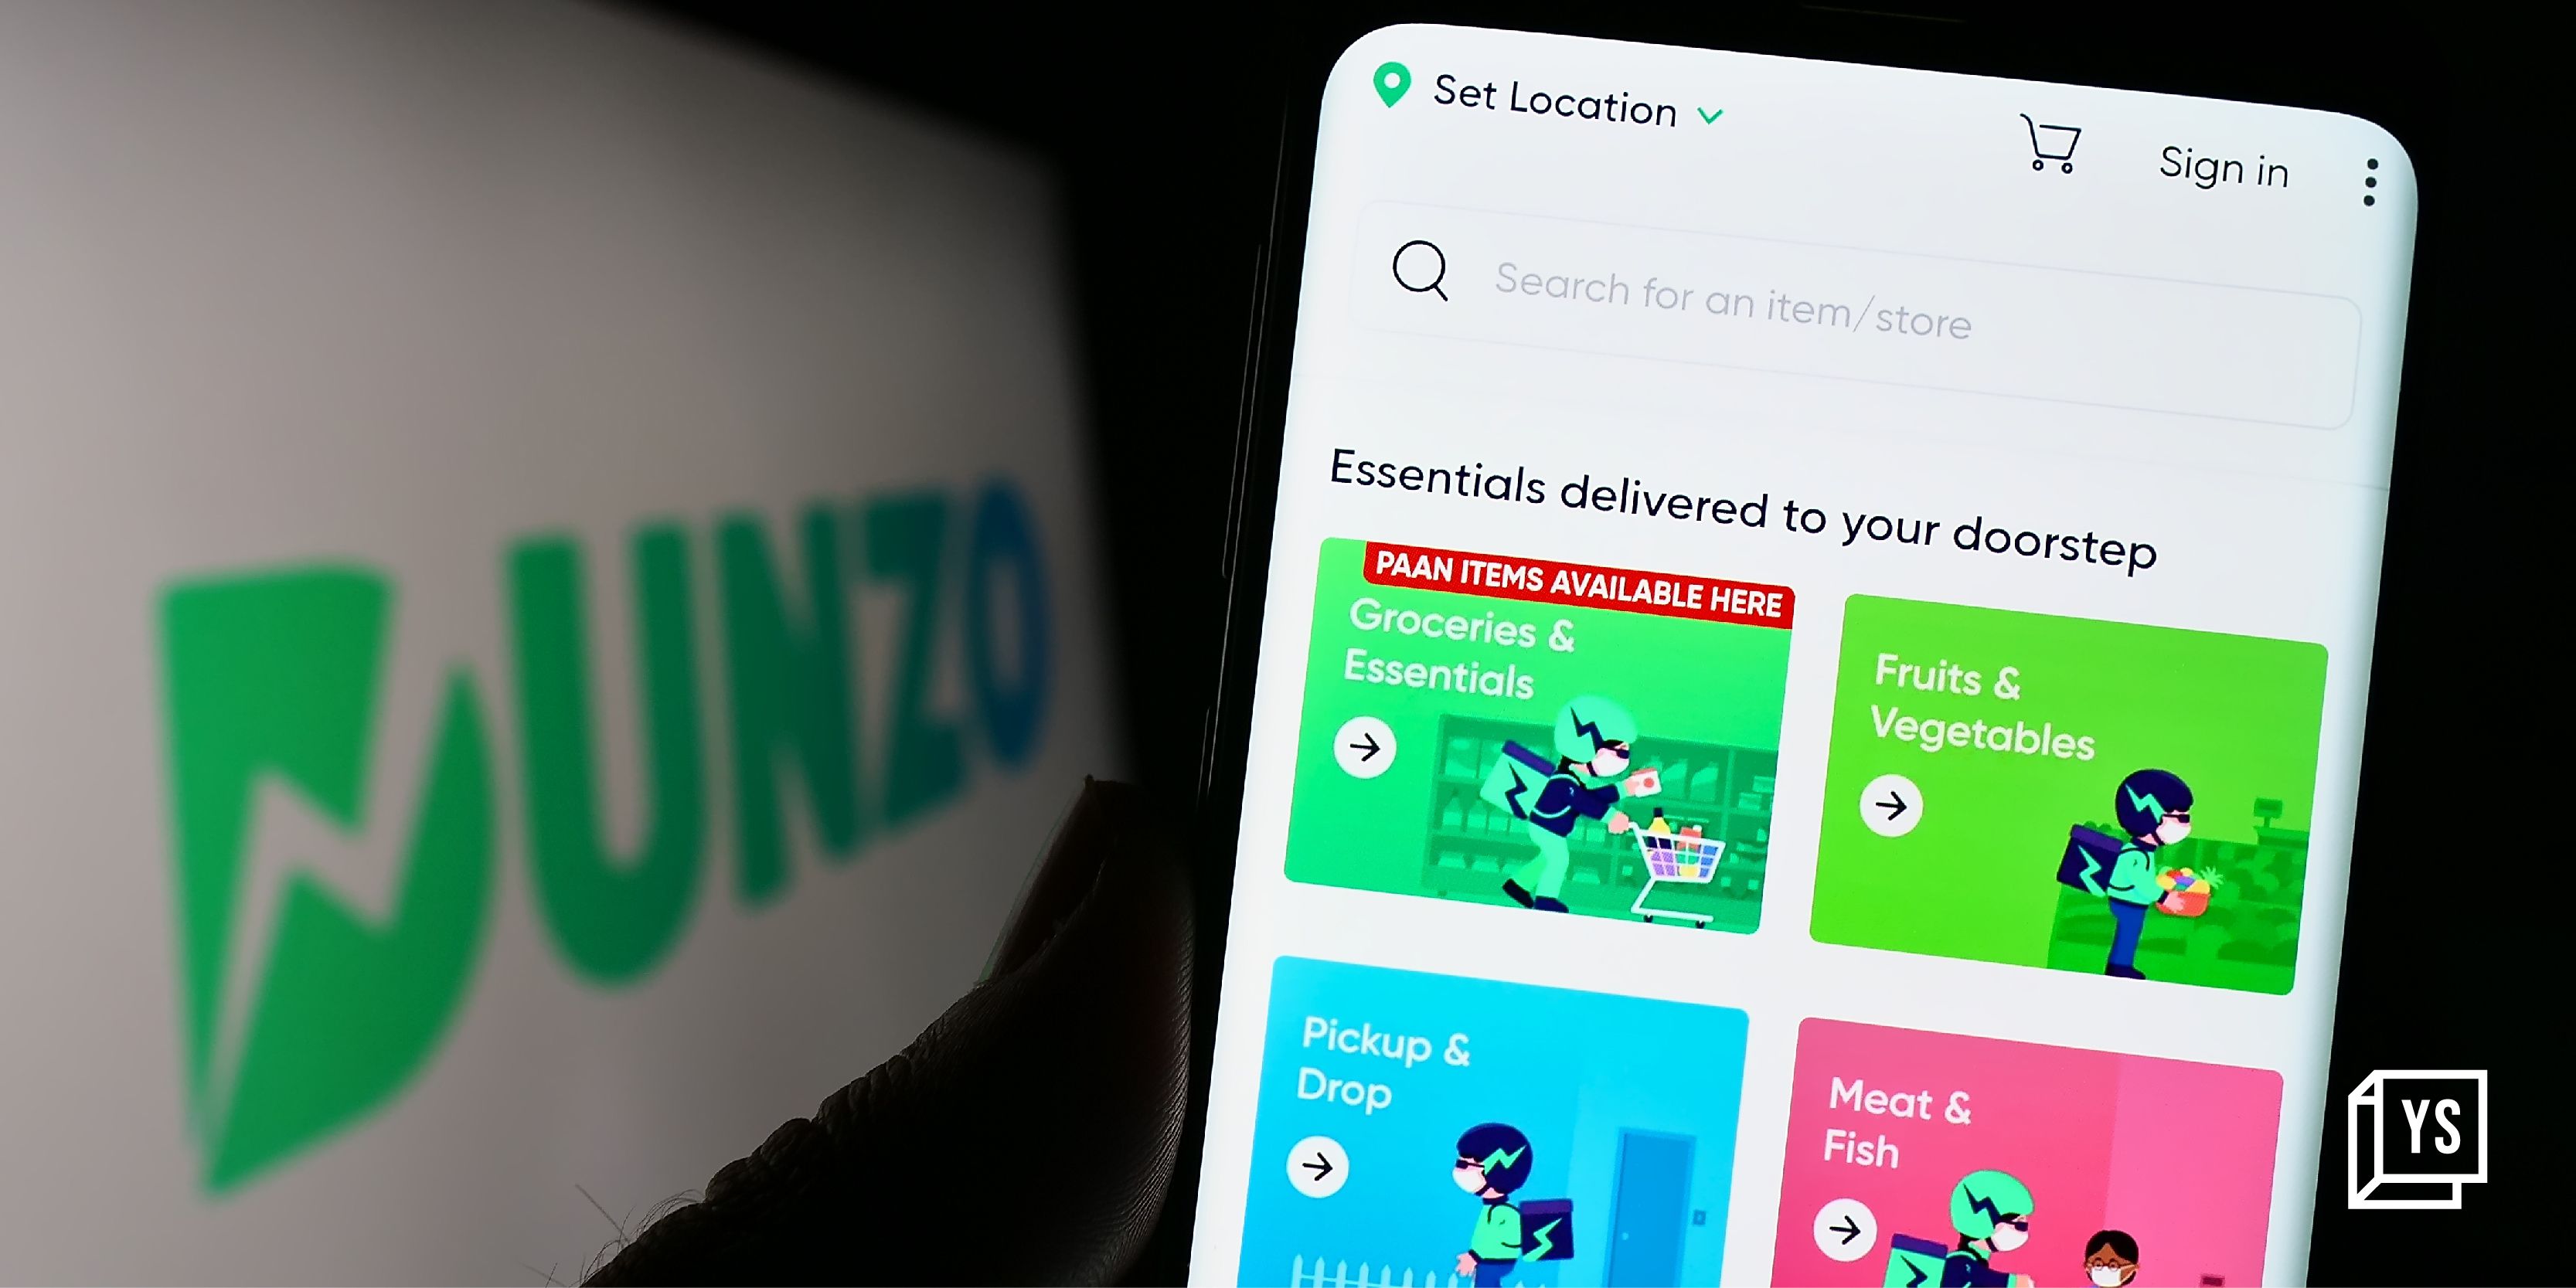 Dunzo co-founder Mukund Jha to exit amid restructuring: Report